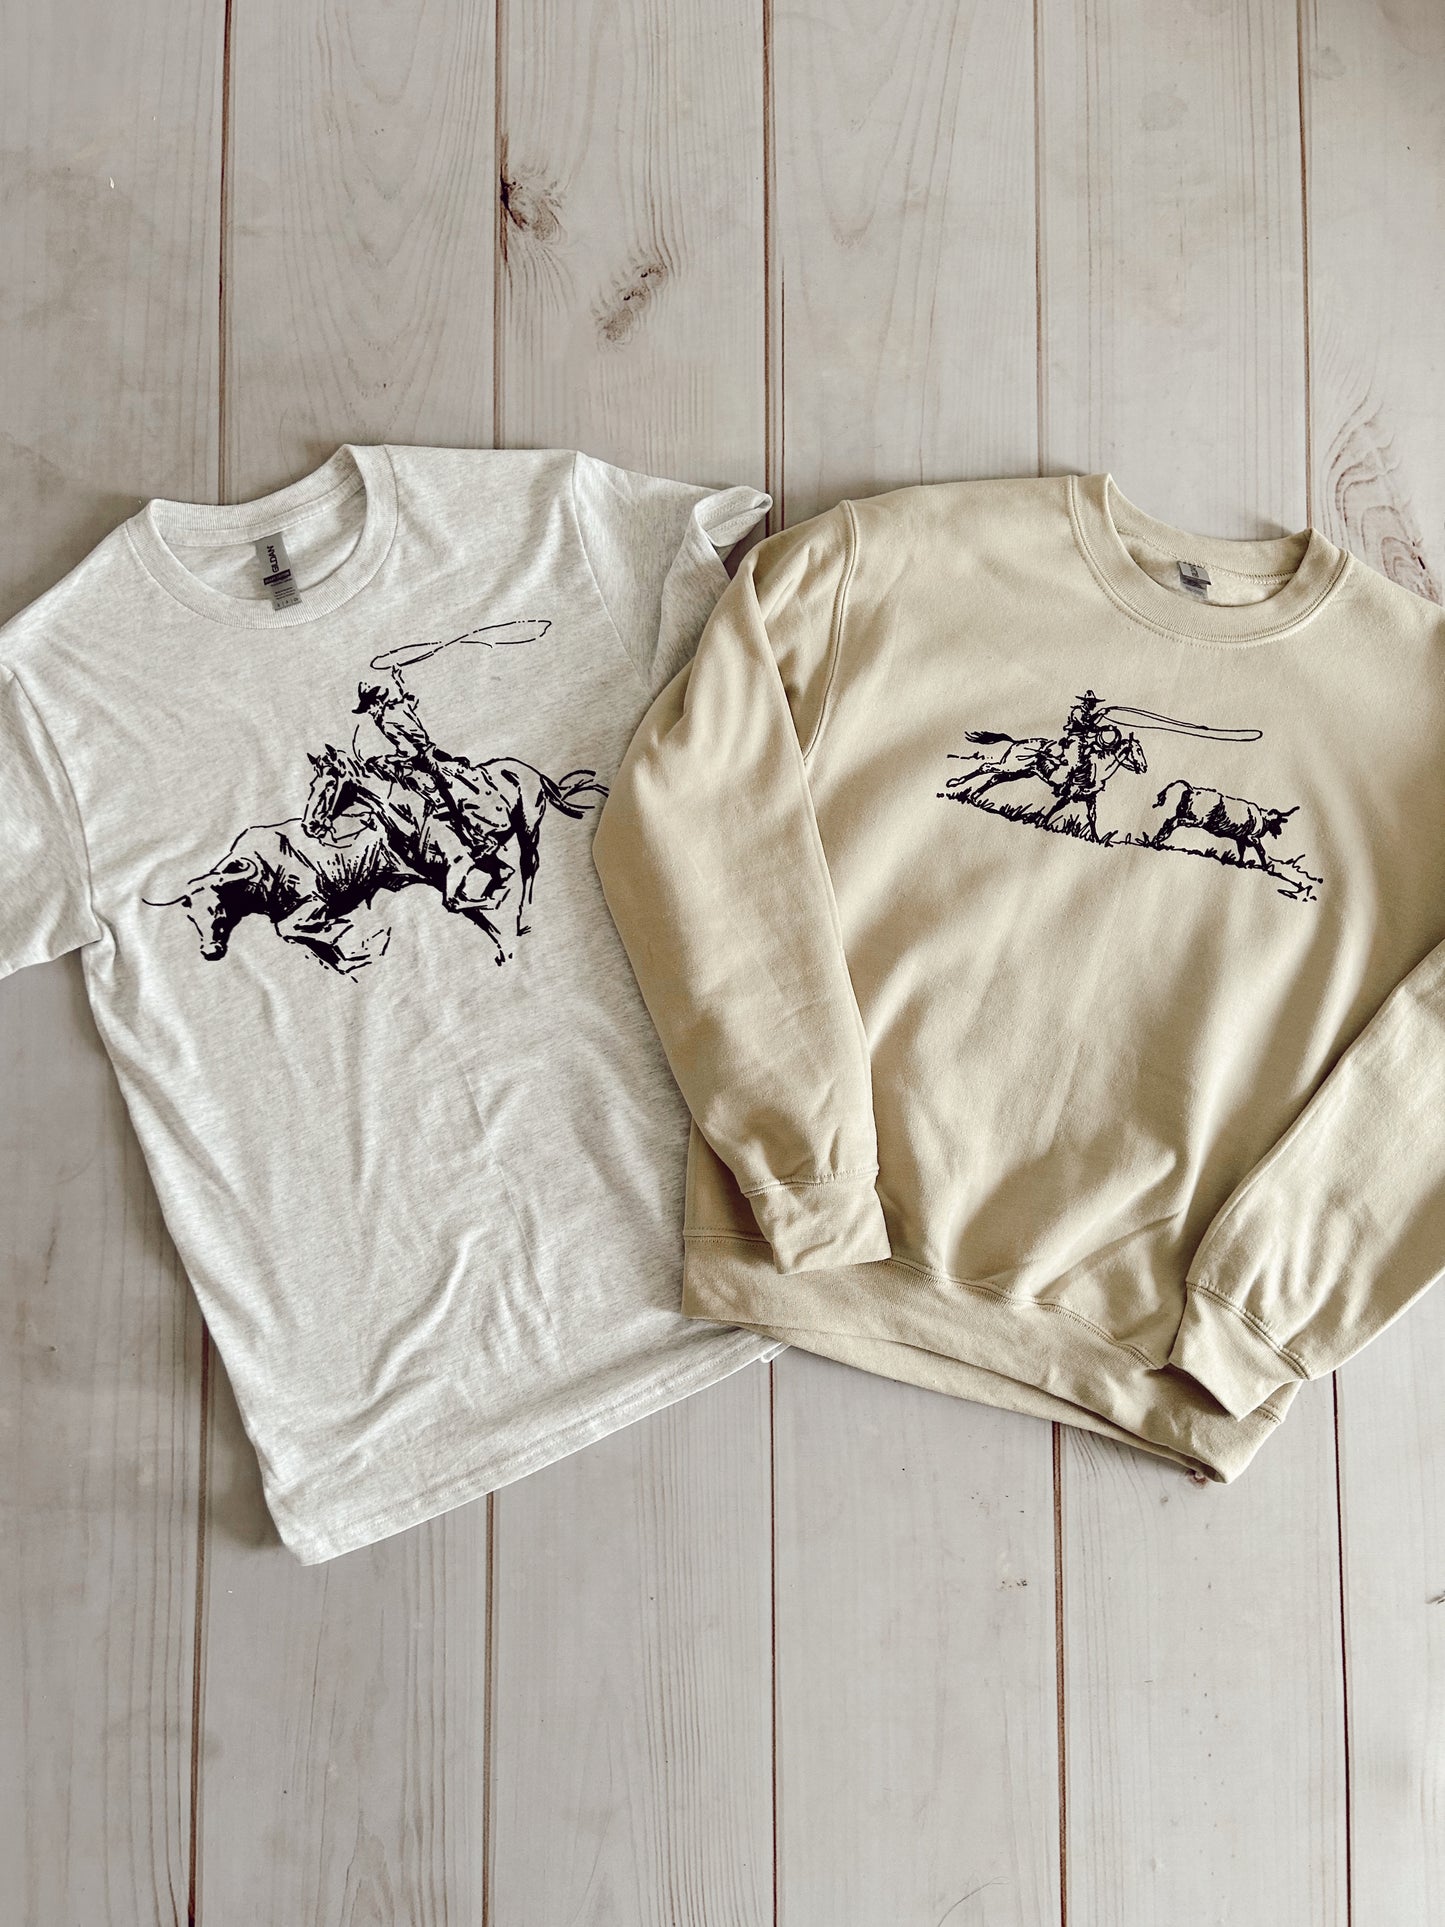 The Cattle Roping Crewneck